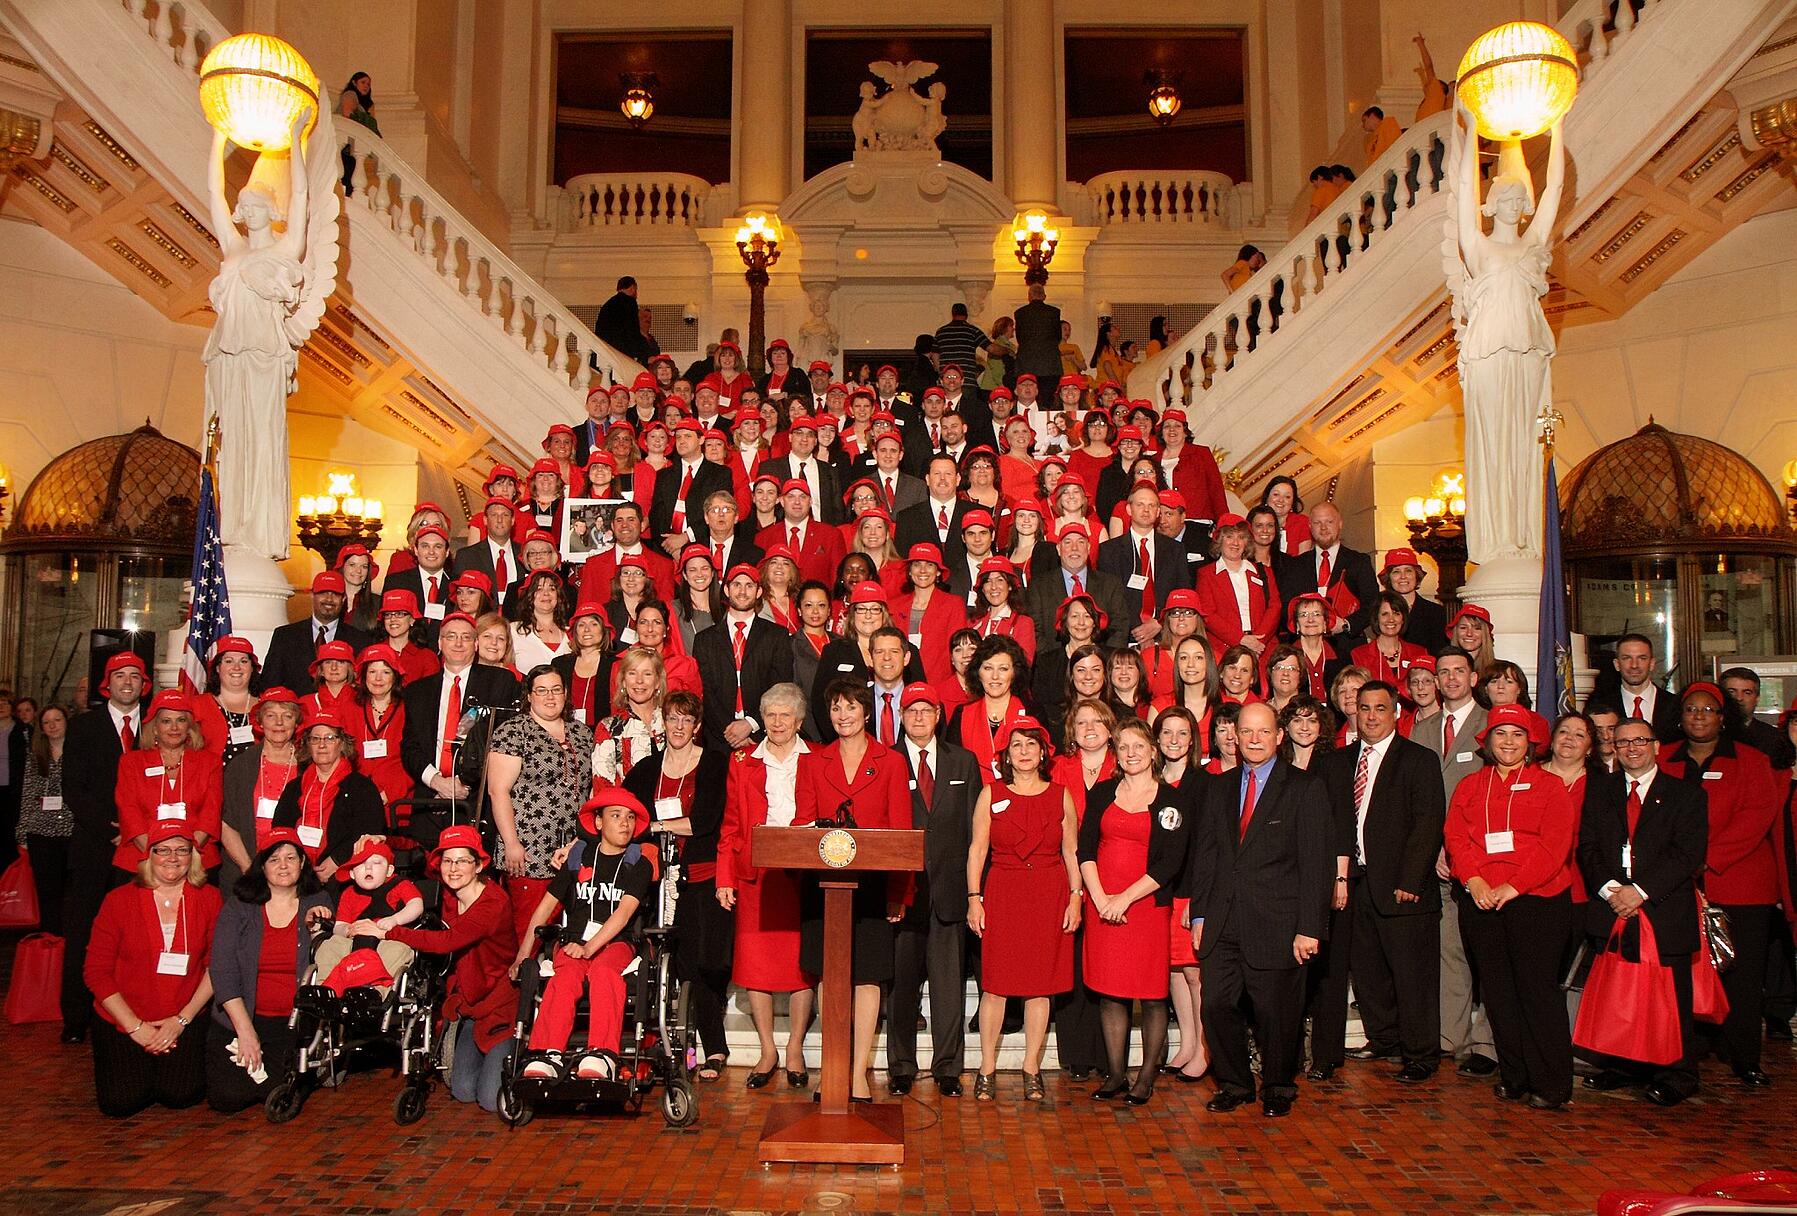 Pa. Govt. "Champions" to be Recognized, Medically Fragile Advocated for on 4/8